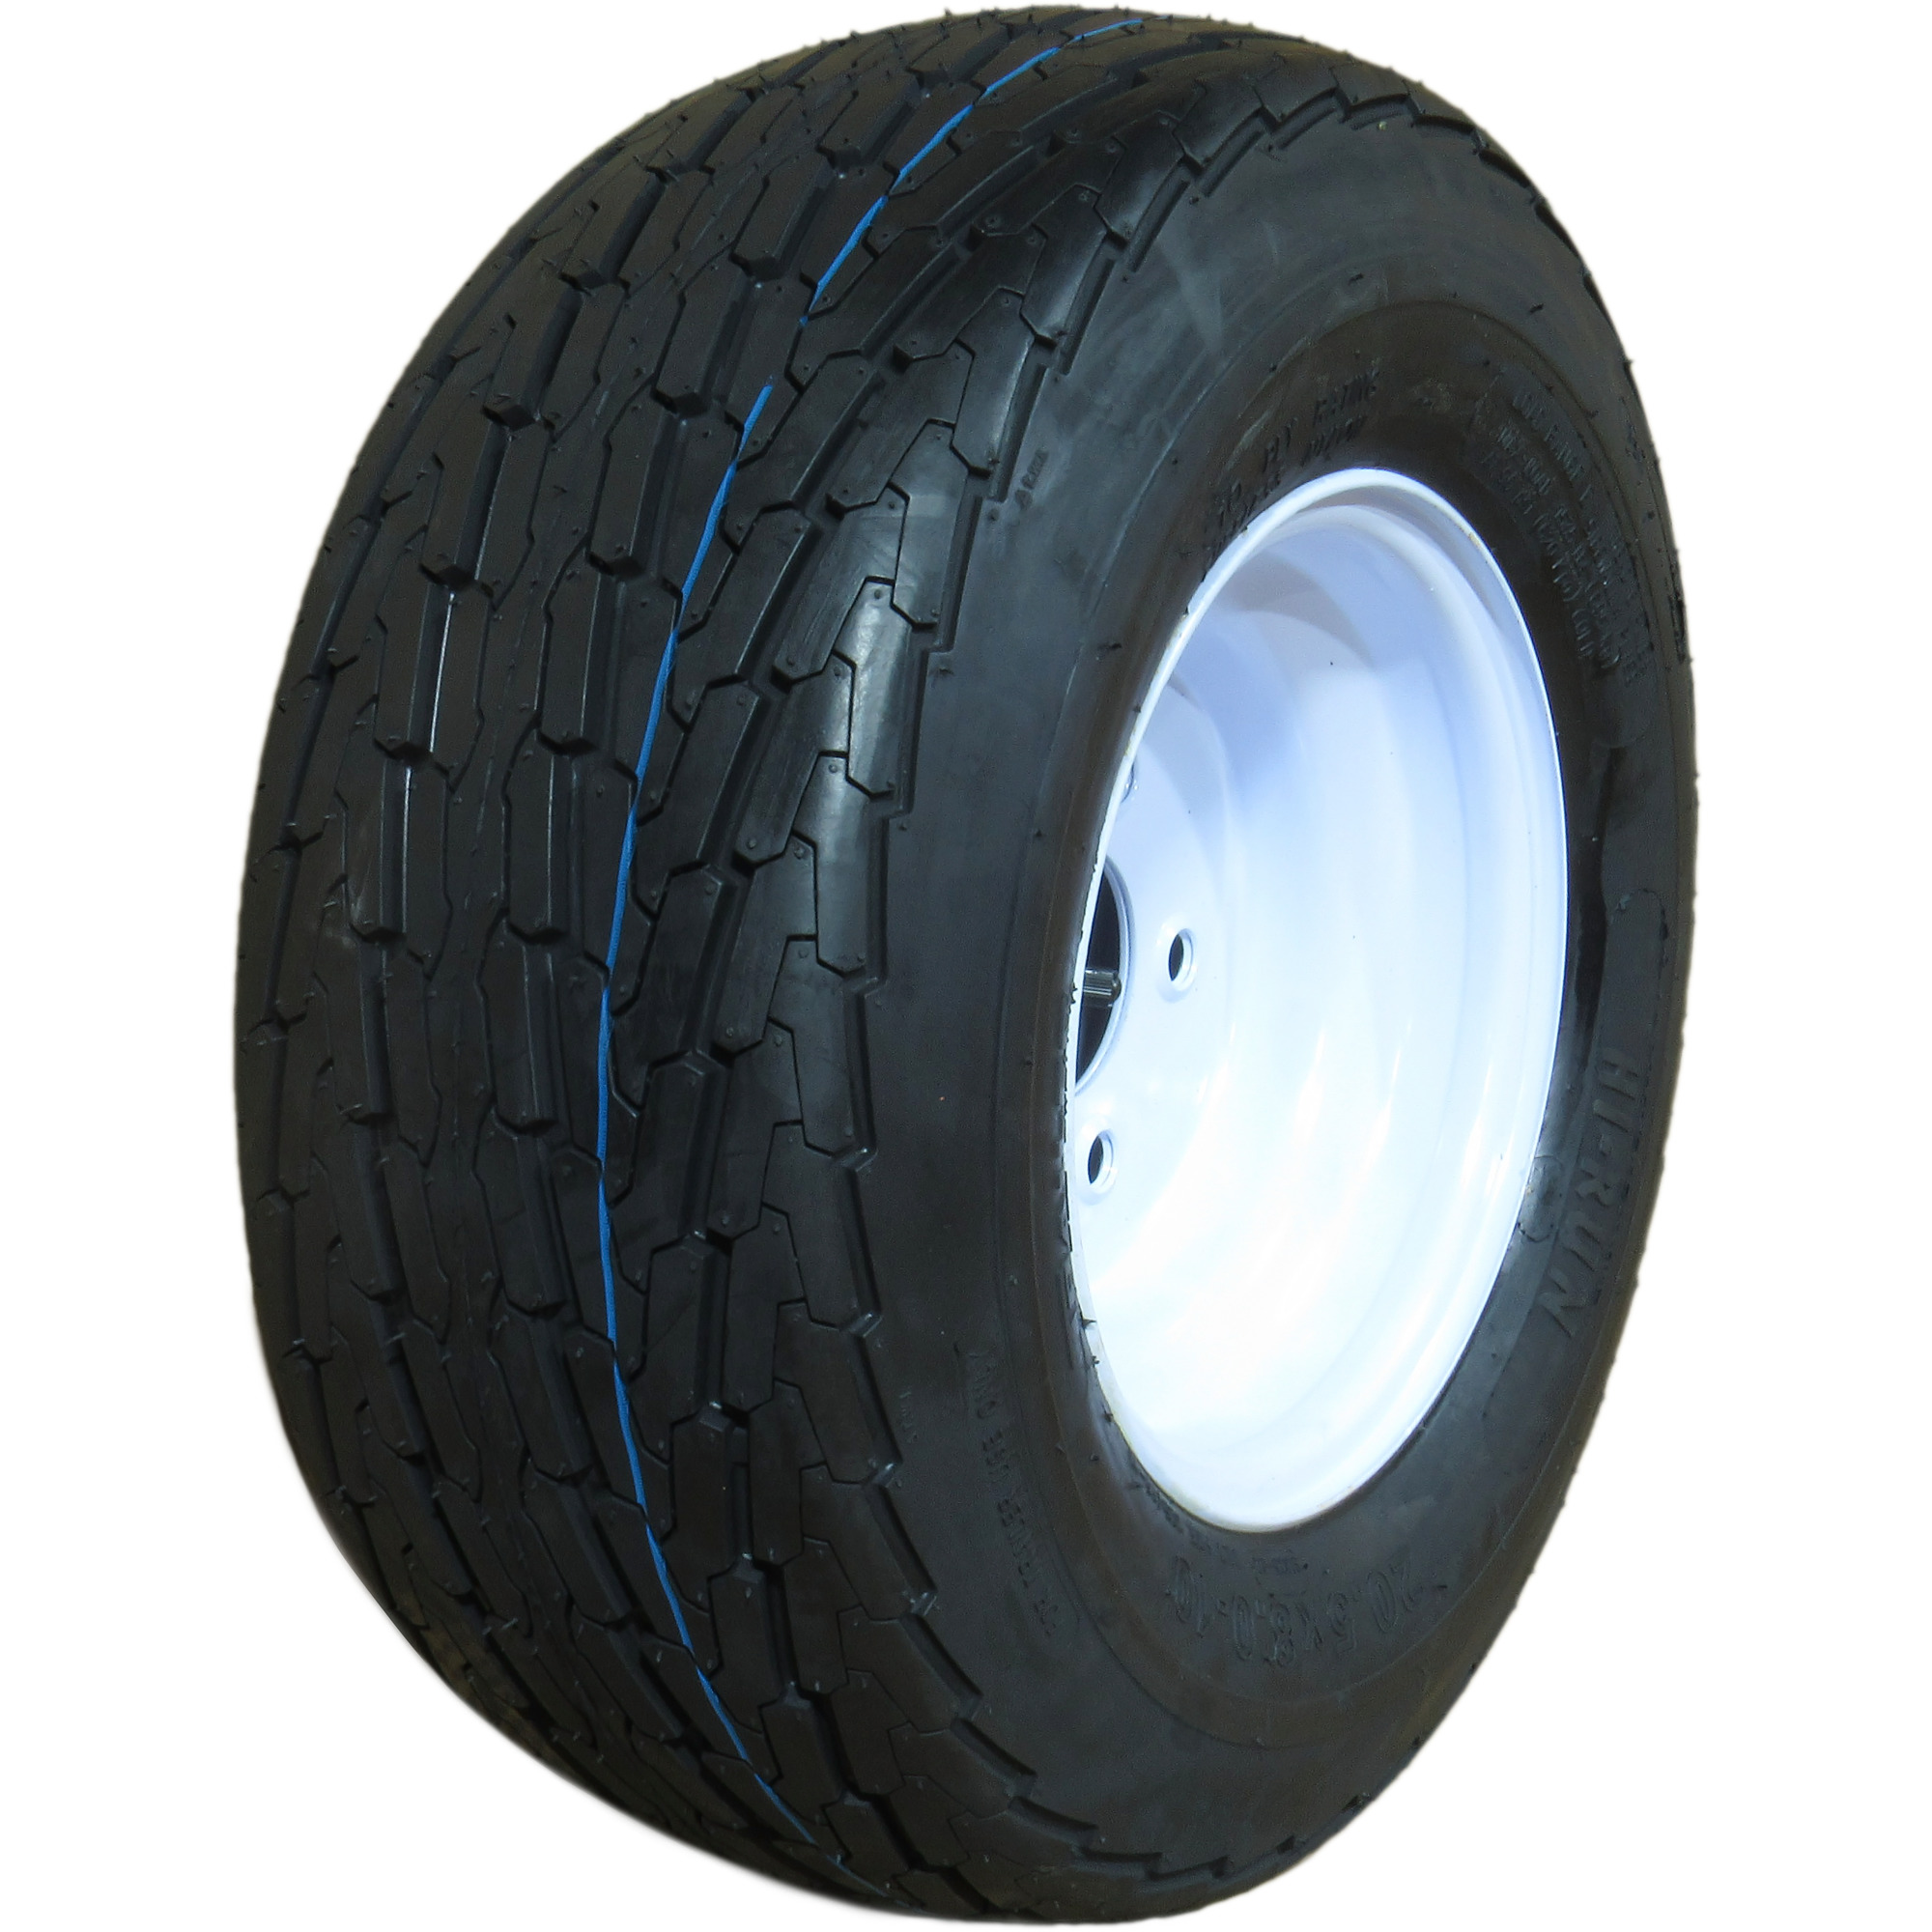 HI-RUN, Highway Trailer Tire Assembly, Bias-Ply, Tire Size 20.5/8-10 Load Range Rating E, Bolt Holes (qty.) 5 Model ASB1048